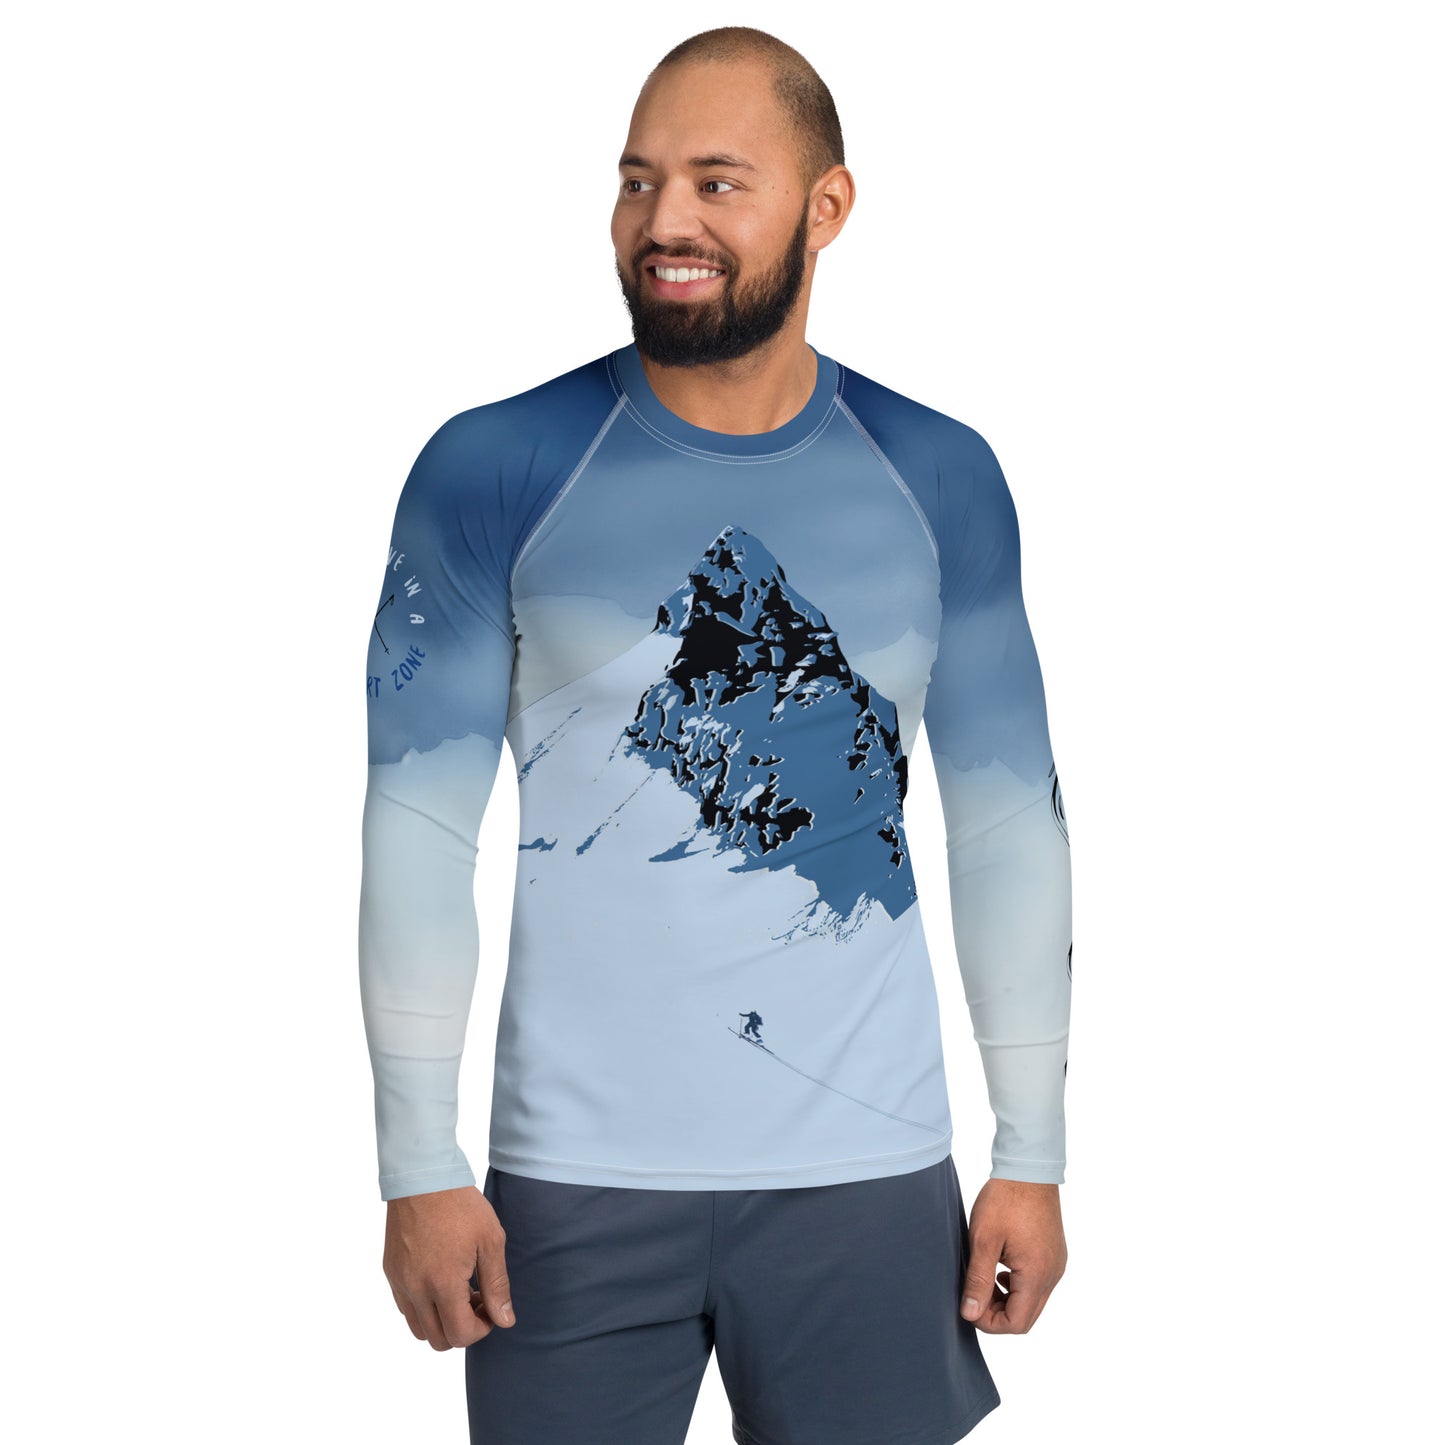 The King - Dont live in a comfort zone baselayer men